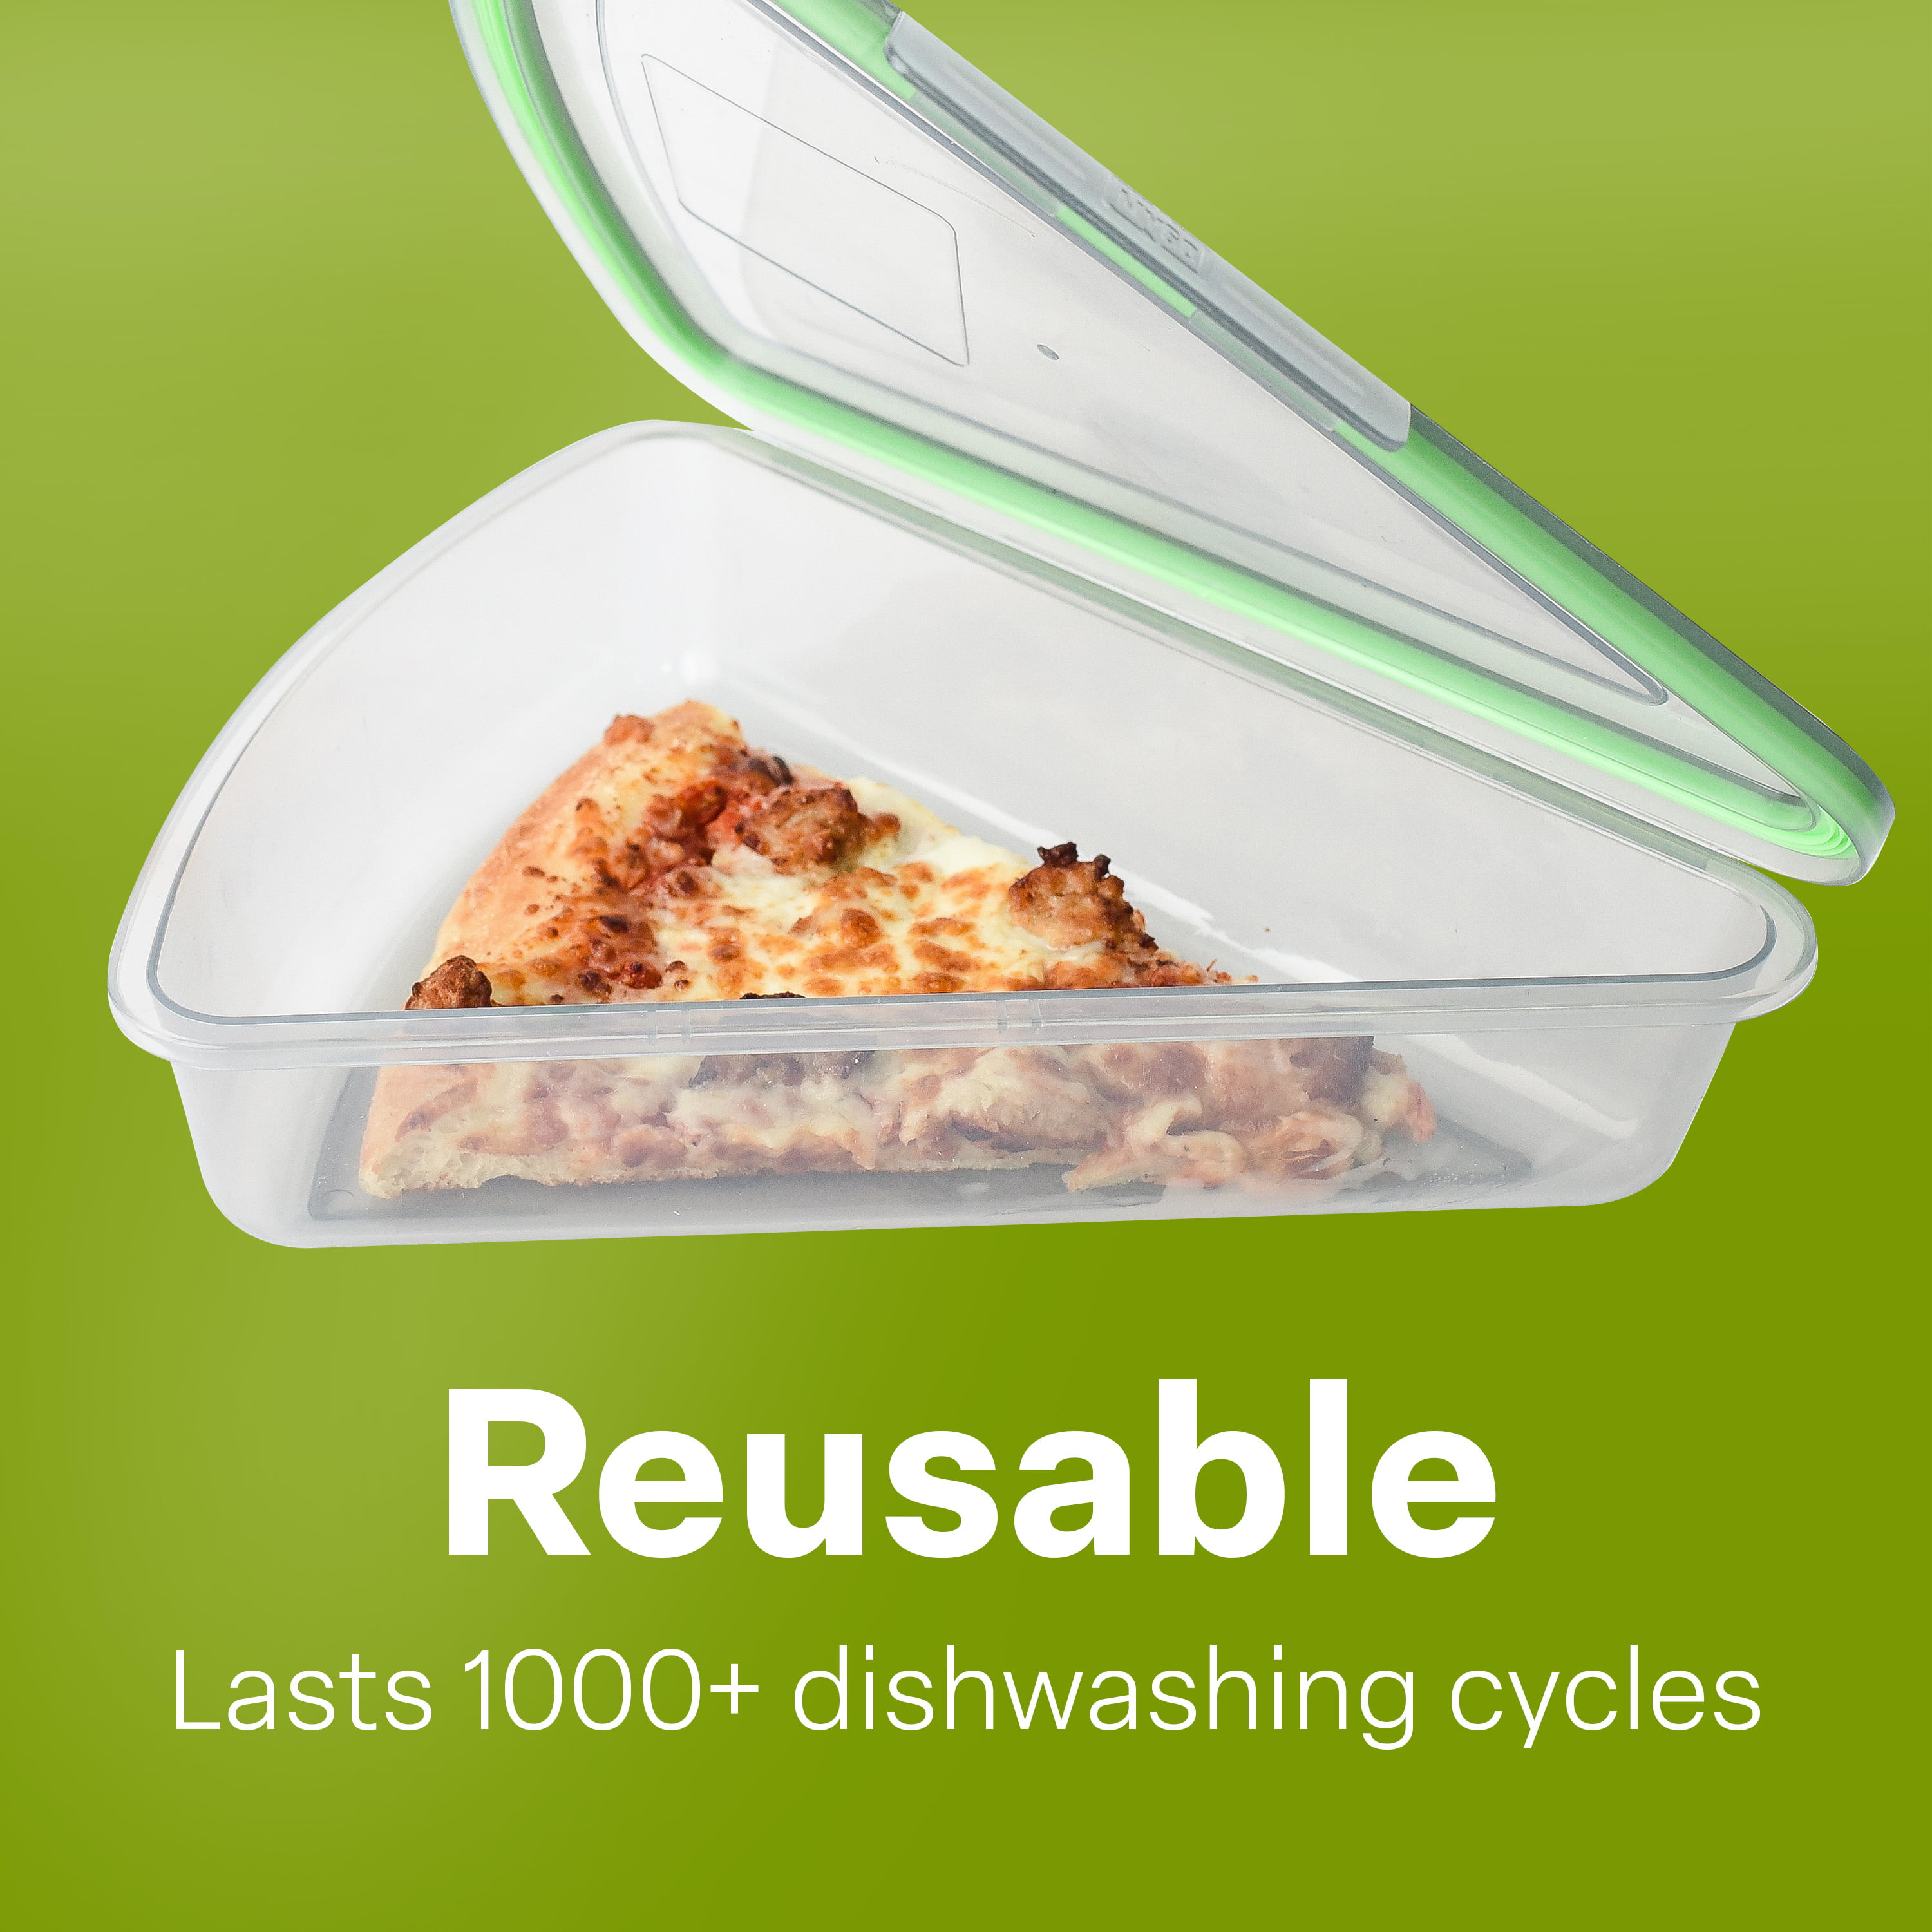 M&S supports shift towards reusable containers for fresh food to go